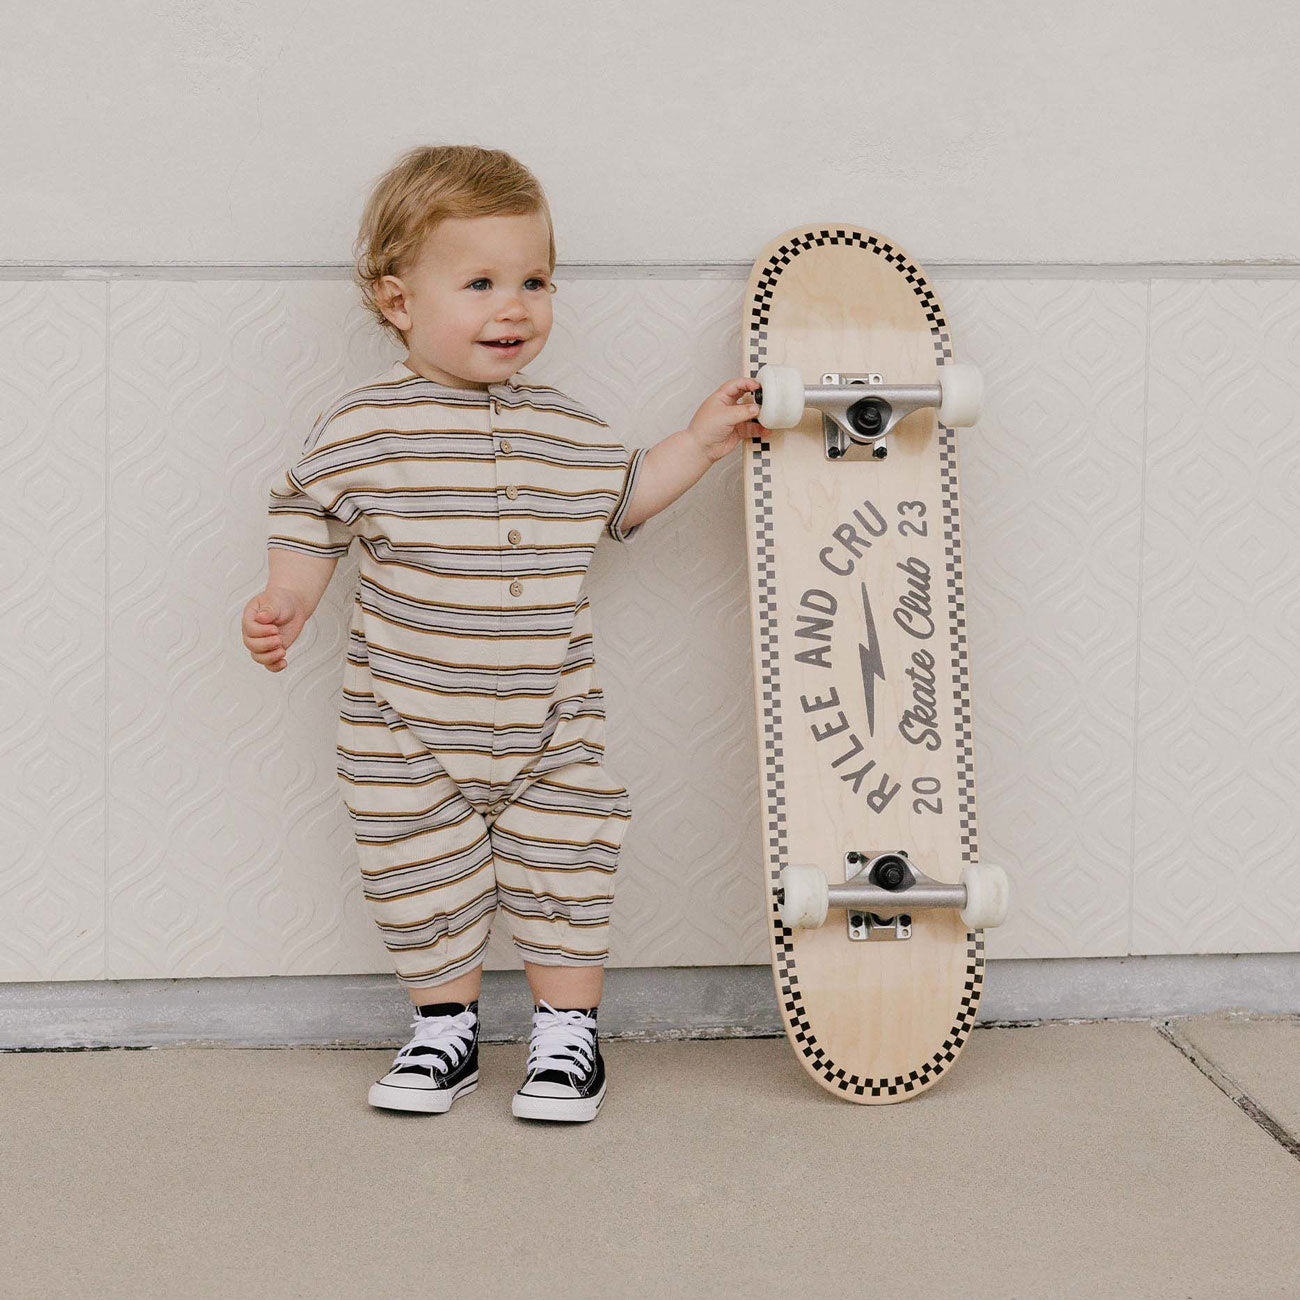 Toddler wearing Rylee and Cru Hayes Jumpsuit - Vintage Stripe - Brass / French Blue / Sand